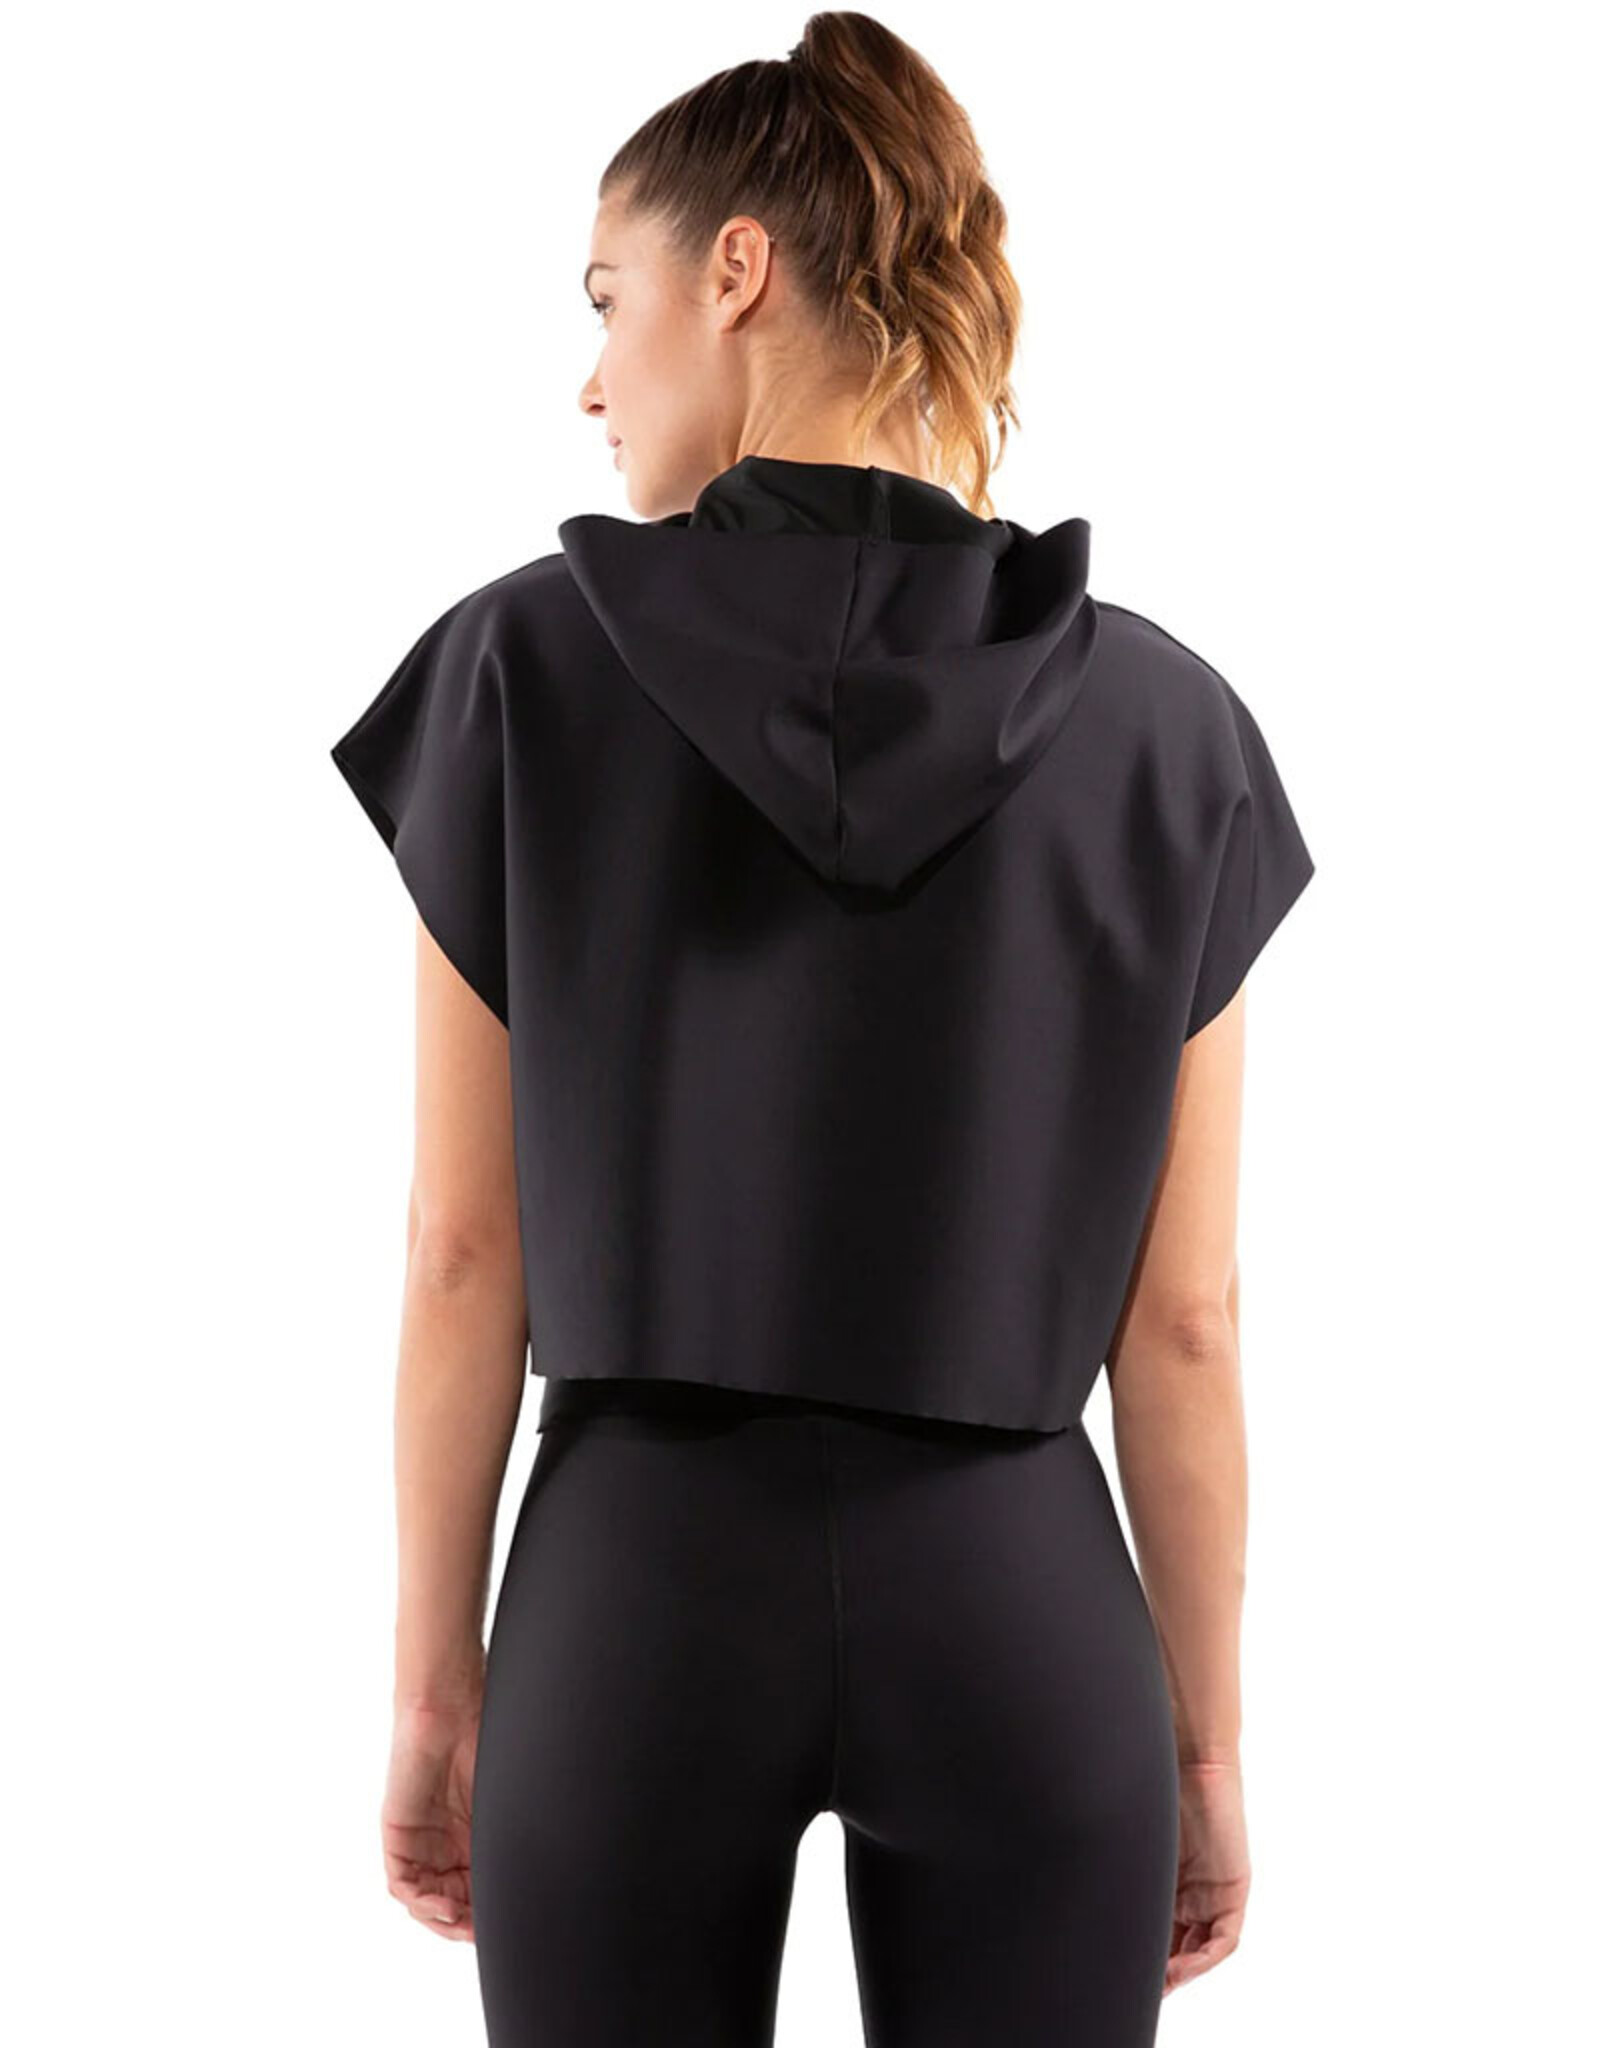 ULTRACOR ESSENTIAL LUX SPARROW SLEEVELESS HOODIE